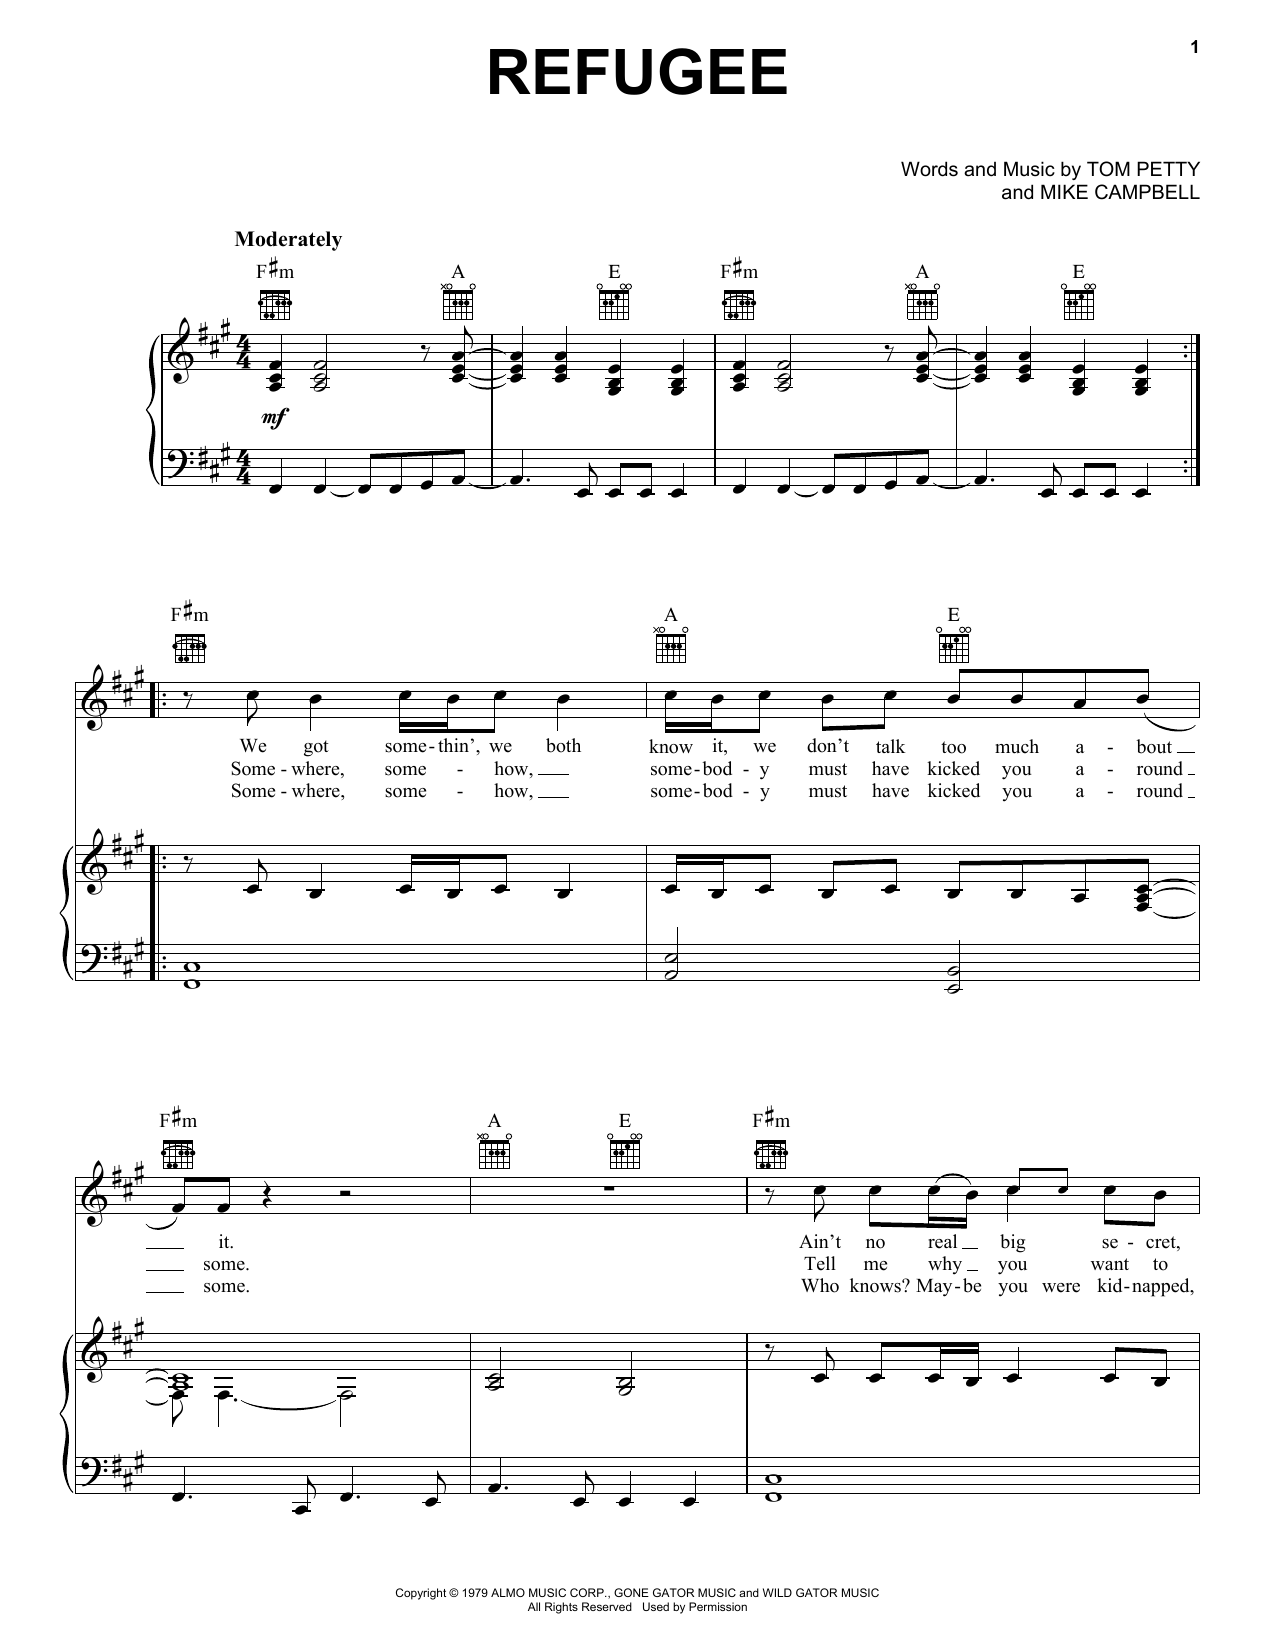 Tom Petty And The Heartbreakers Refugee sheet music notes and chords. Download Printable PDF.